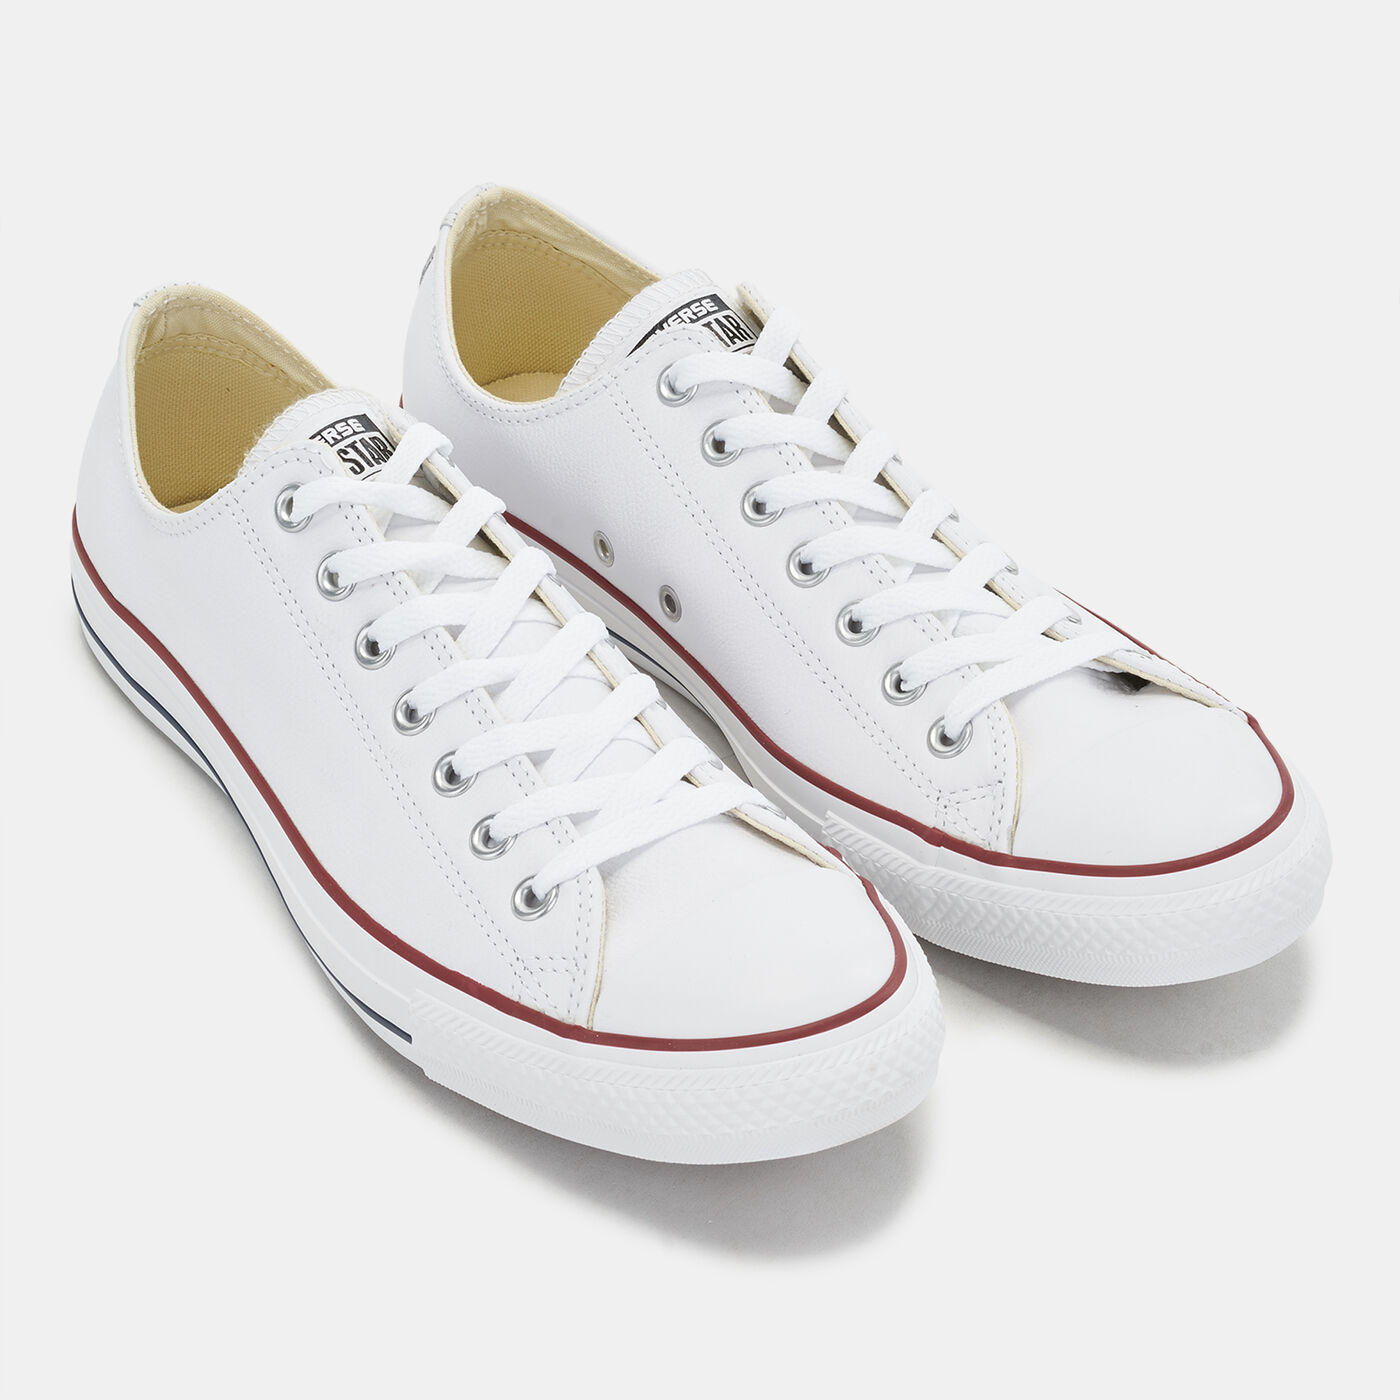 Chuck Taylor All Star Leather Unisex Shoe